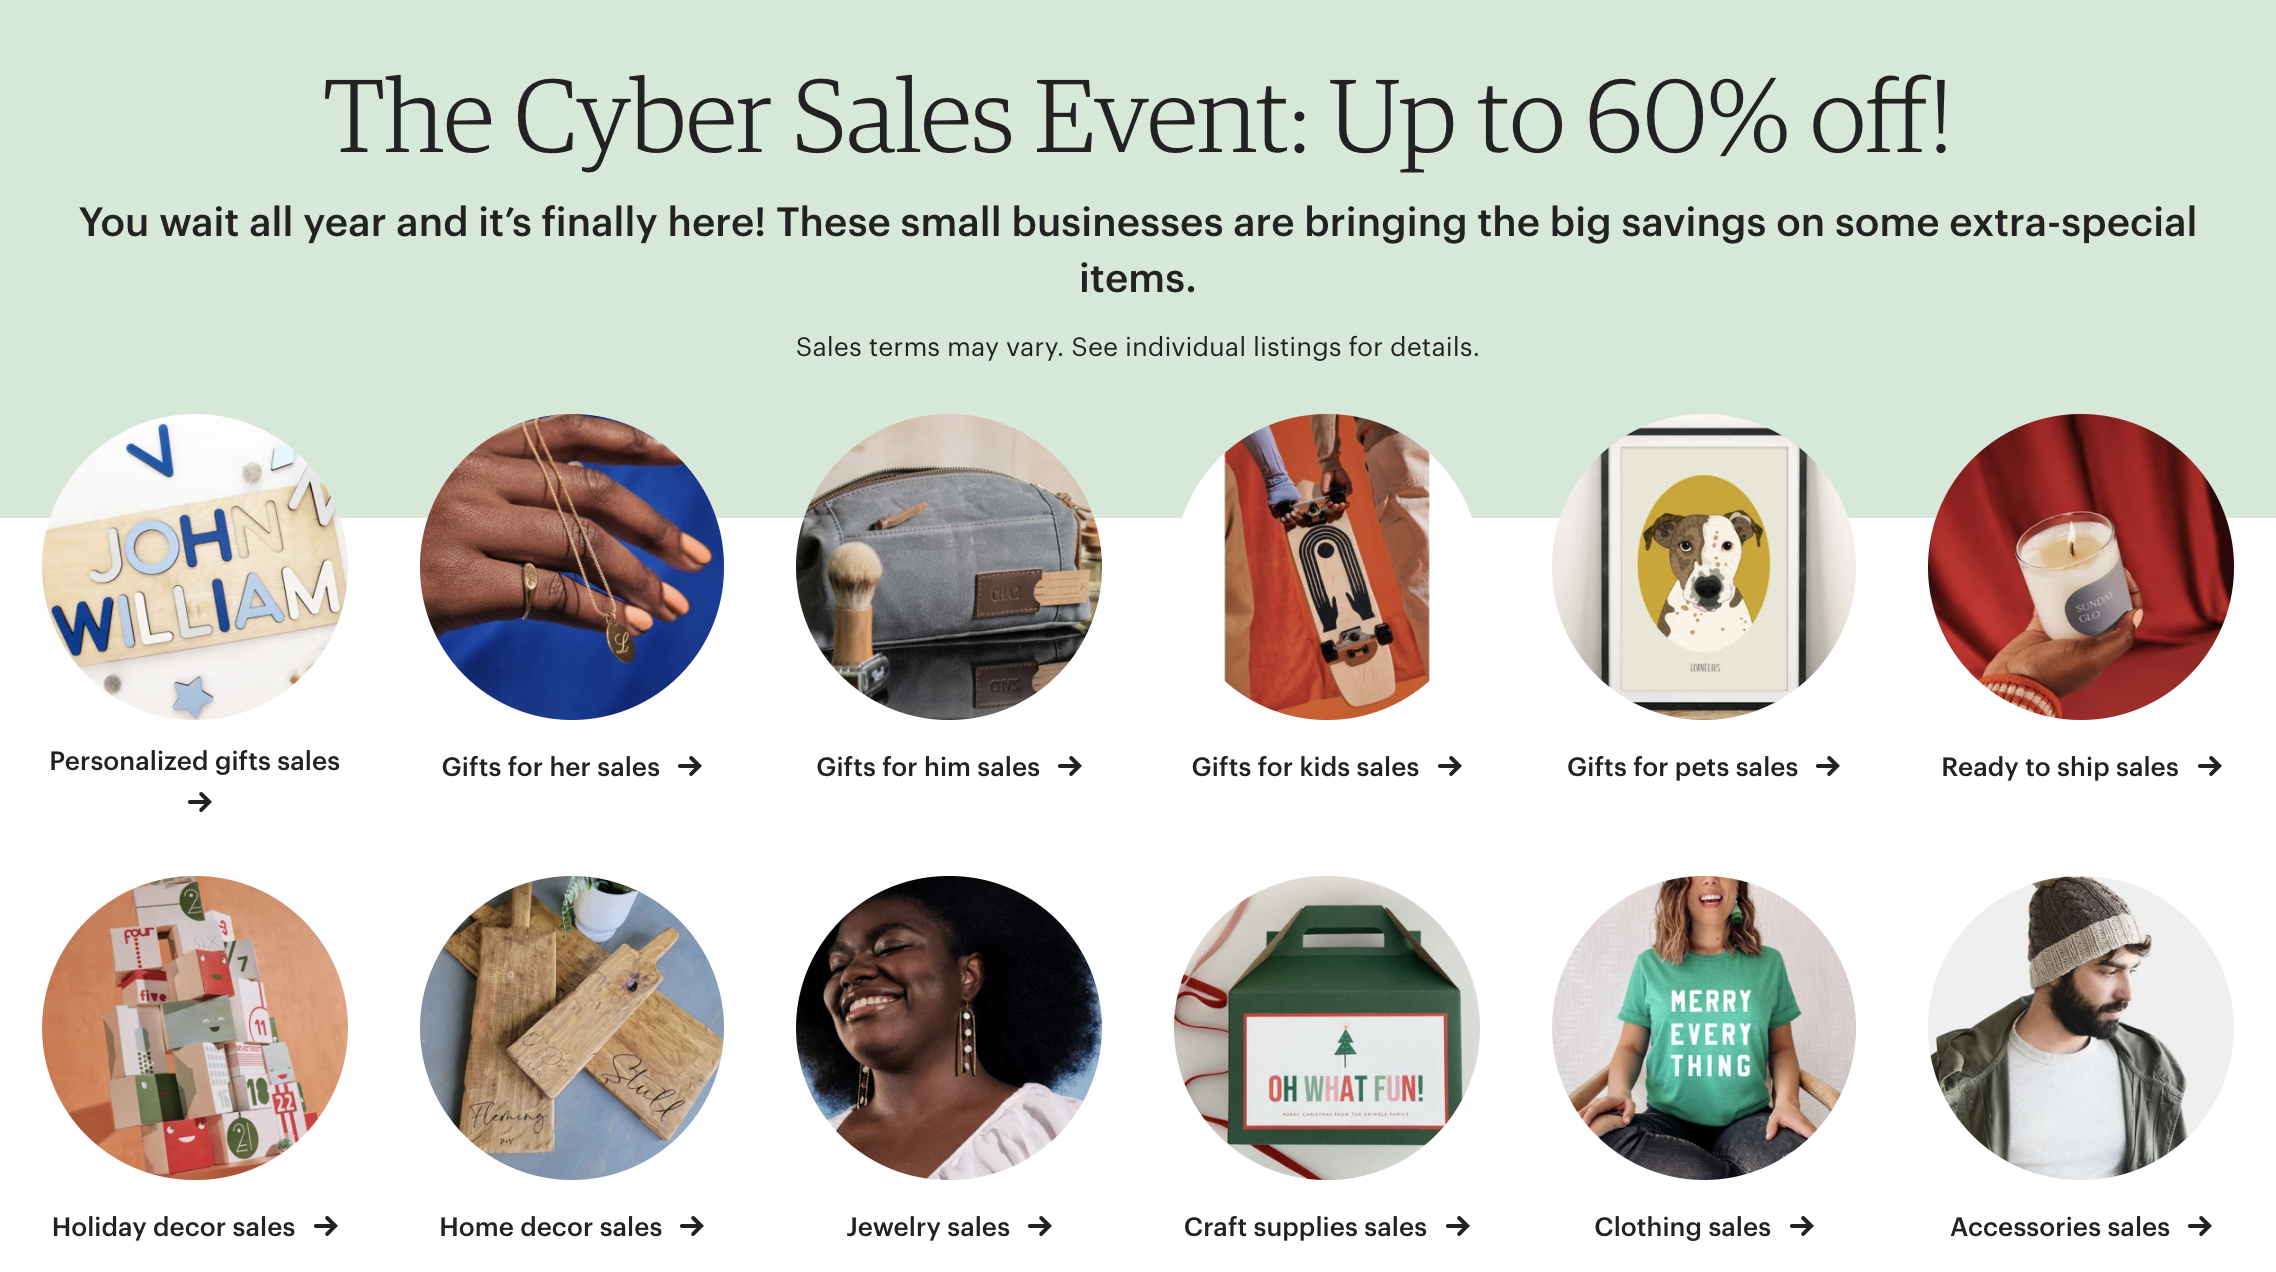 The Cyber Sales banner